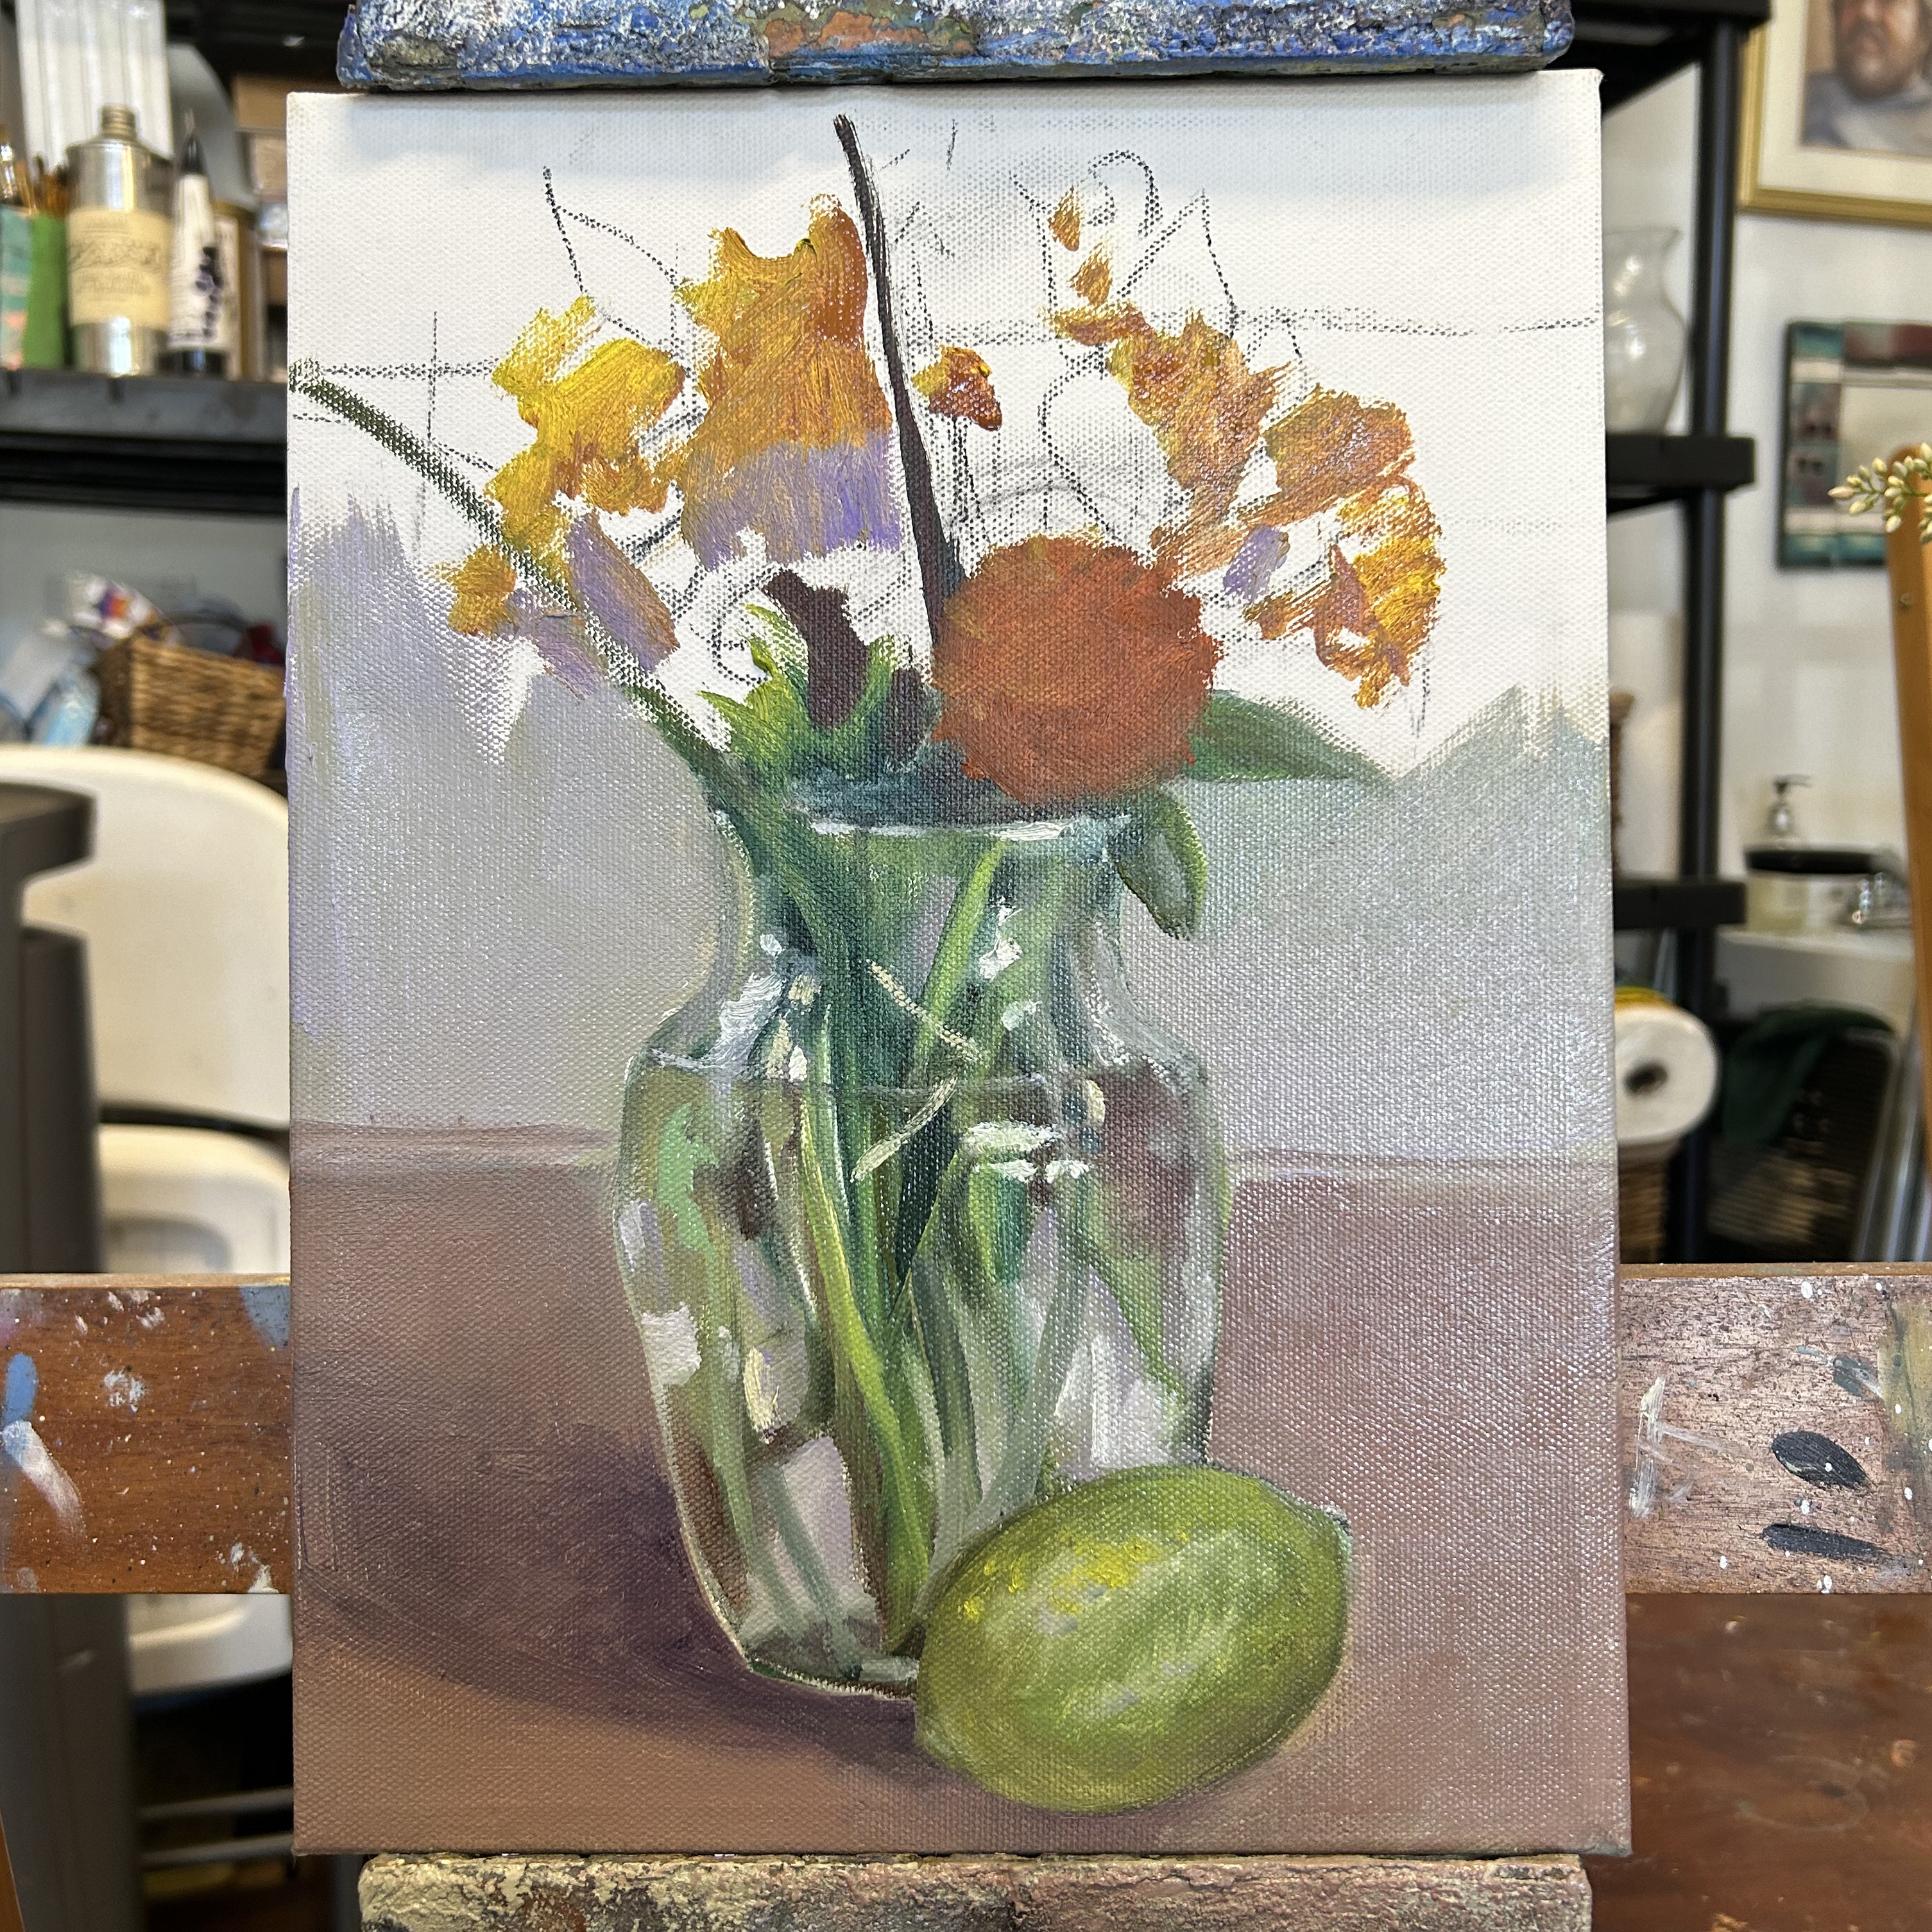 This is an example of Michel McNinch's demonstration of painting a glass vase with flowers and water in it.